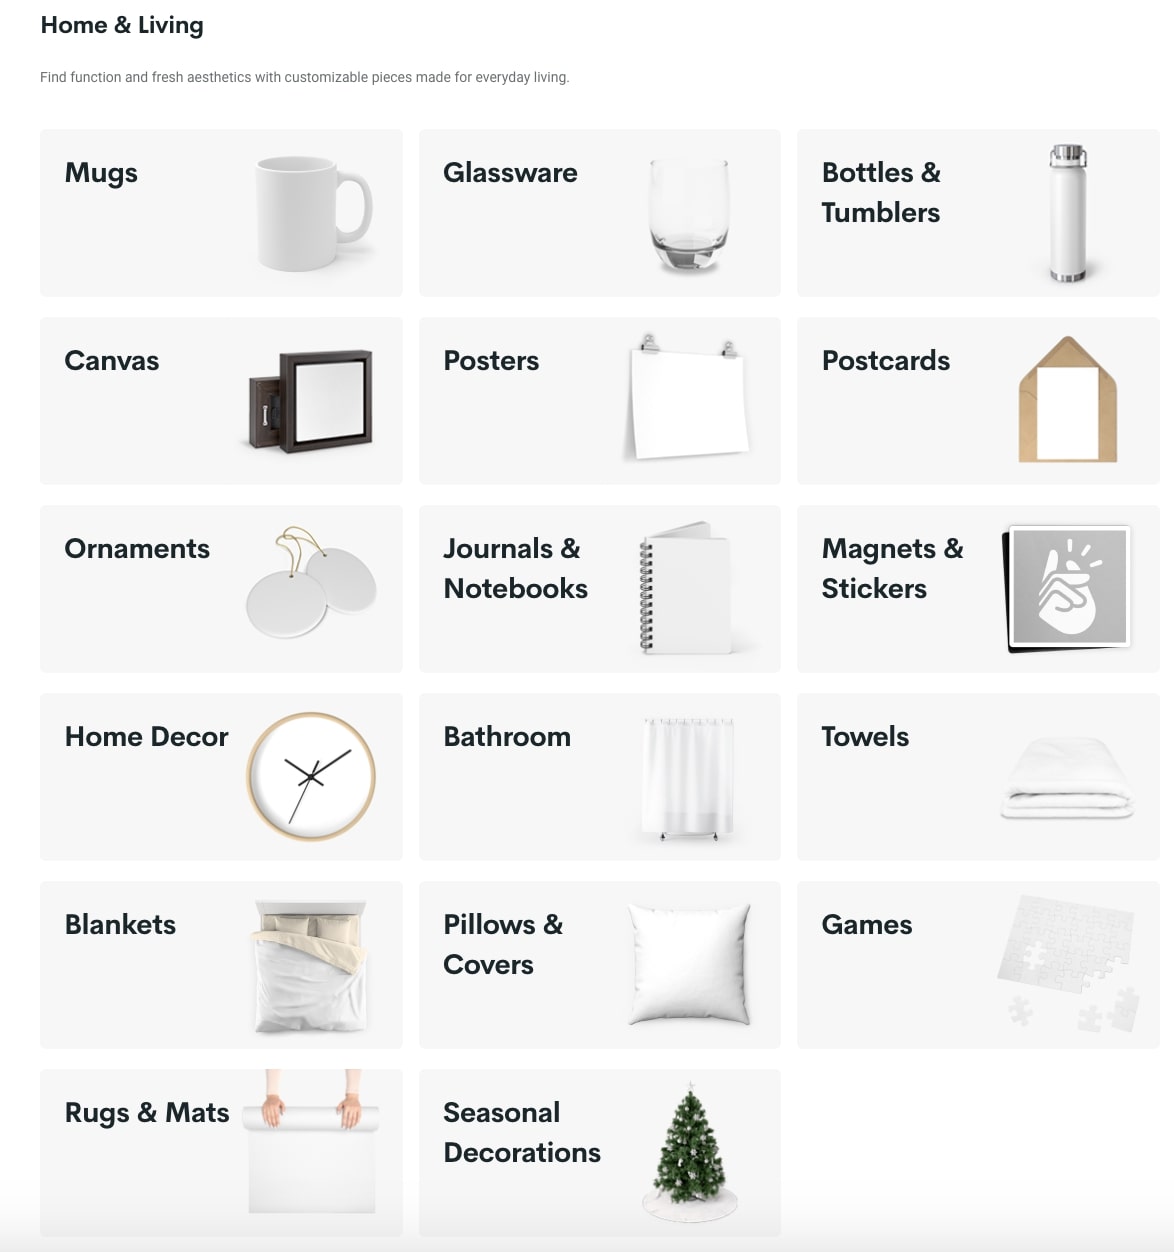 The Home & Living section of the Printify Catalog displaying from mugs and glassware to rugs & mats and seasonal decorations.